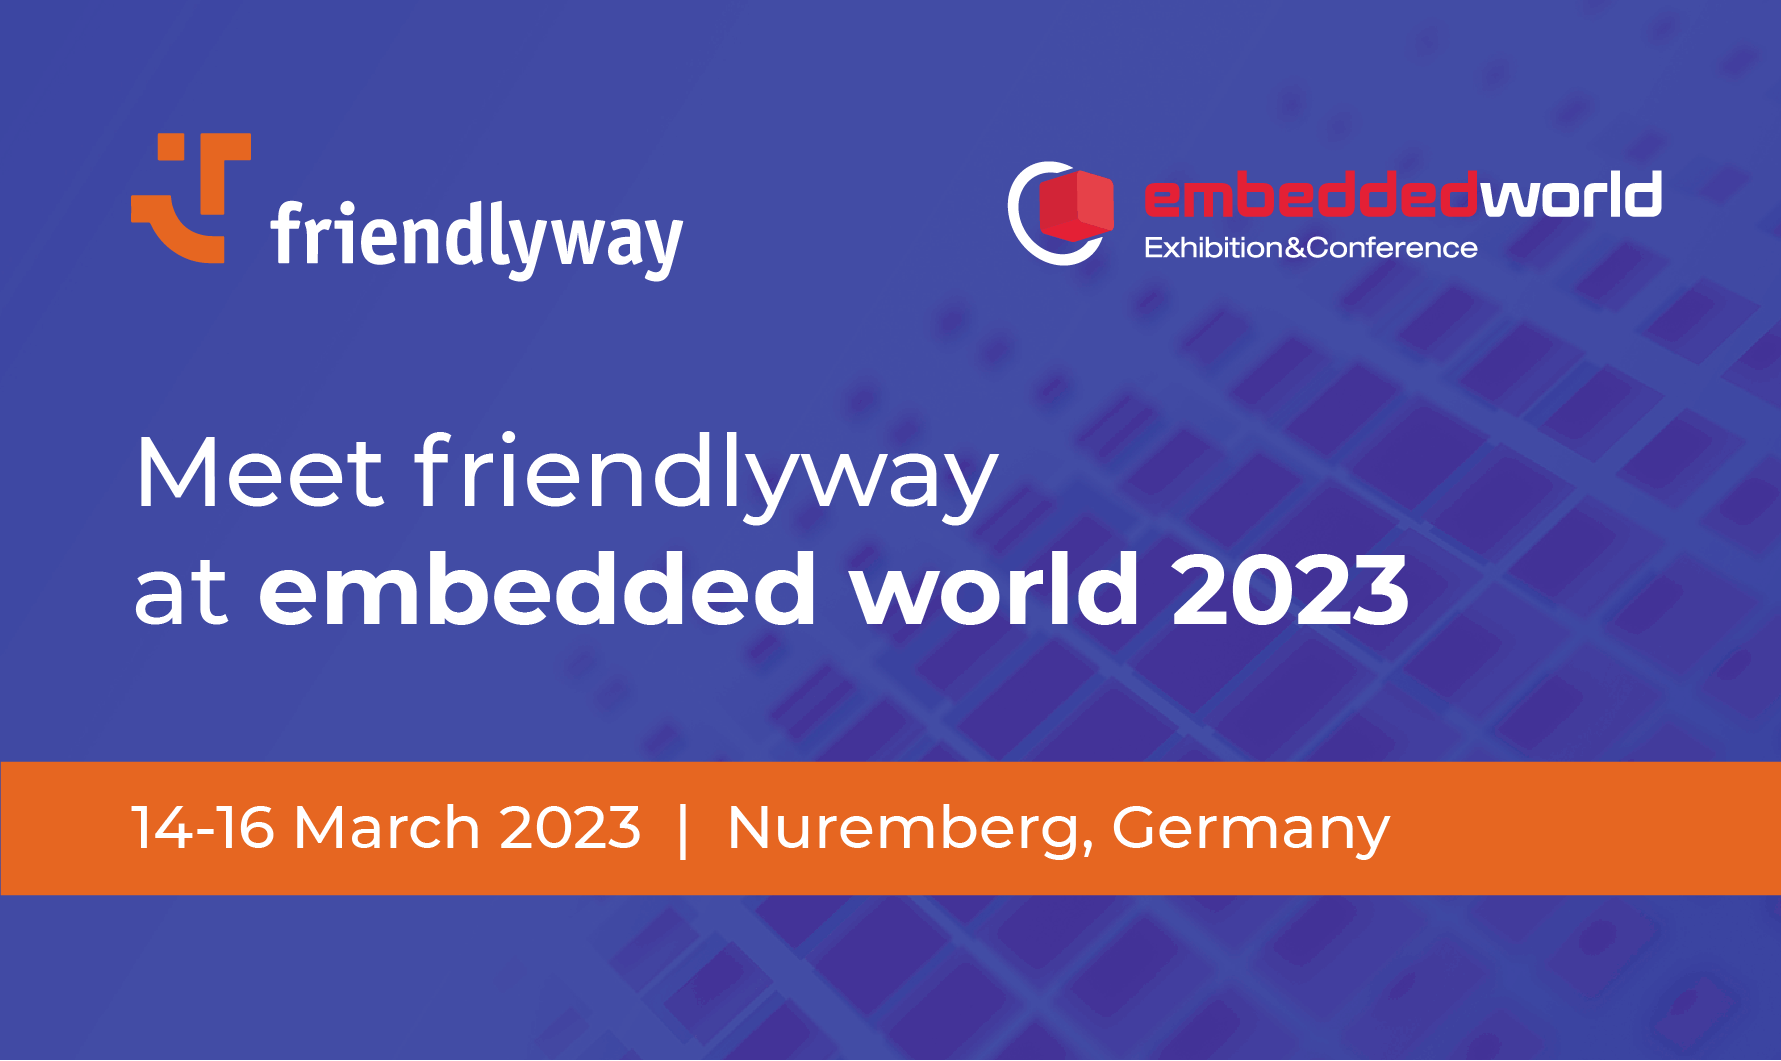 friendlyway at the embedded world